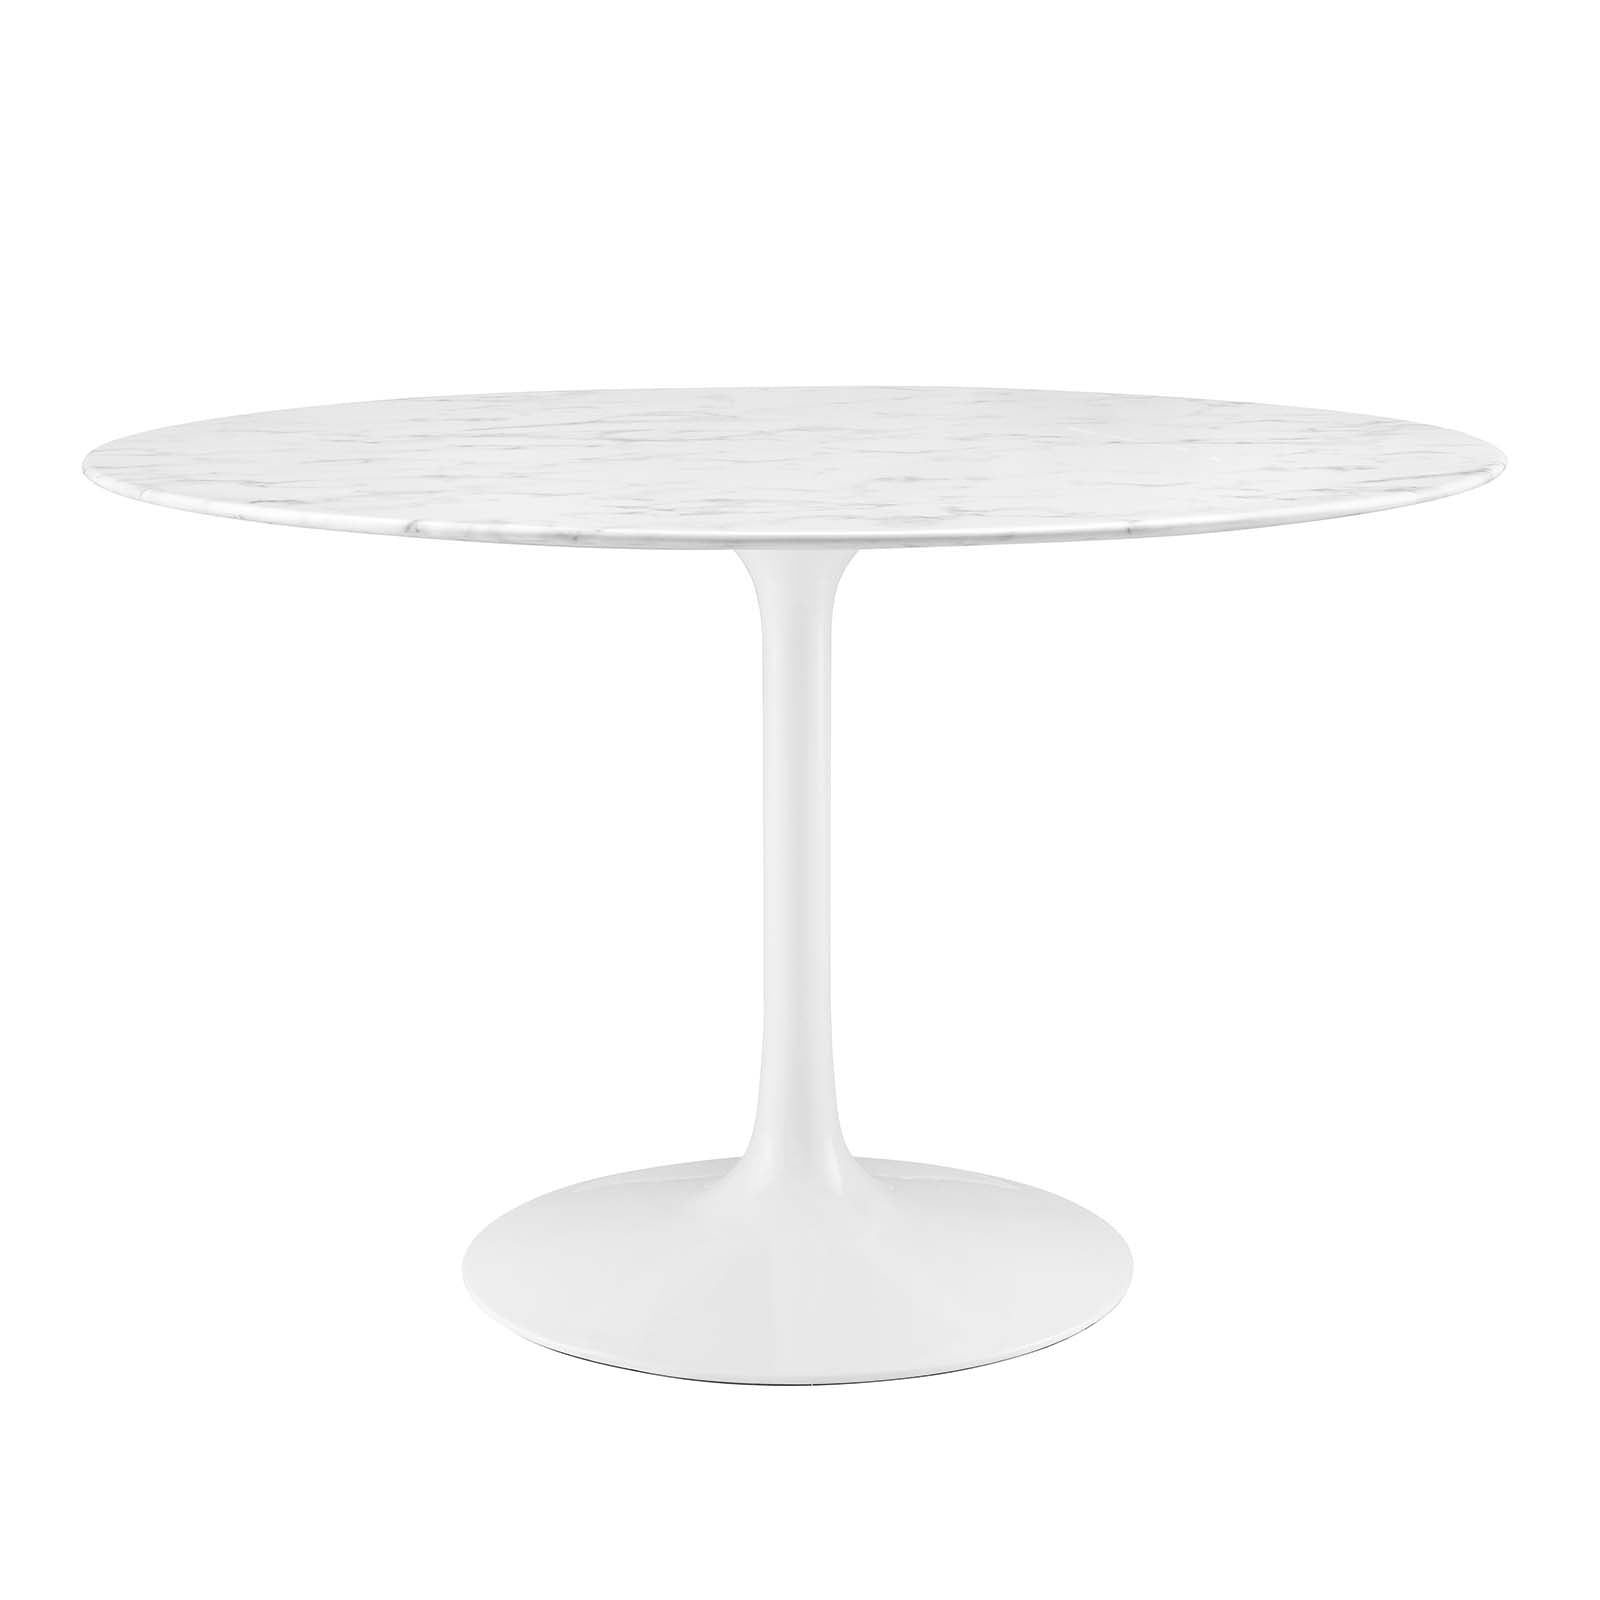 Lippa 47" Round Artificial Marble Dining Table